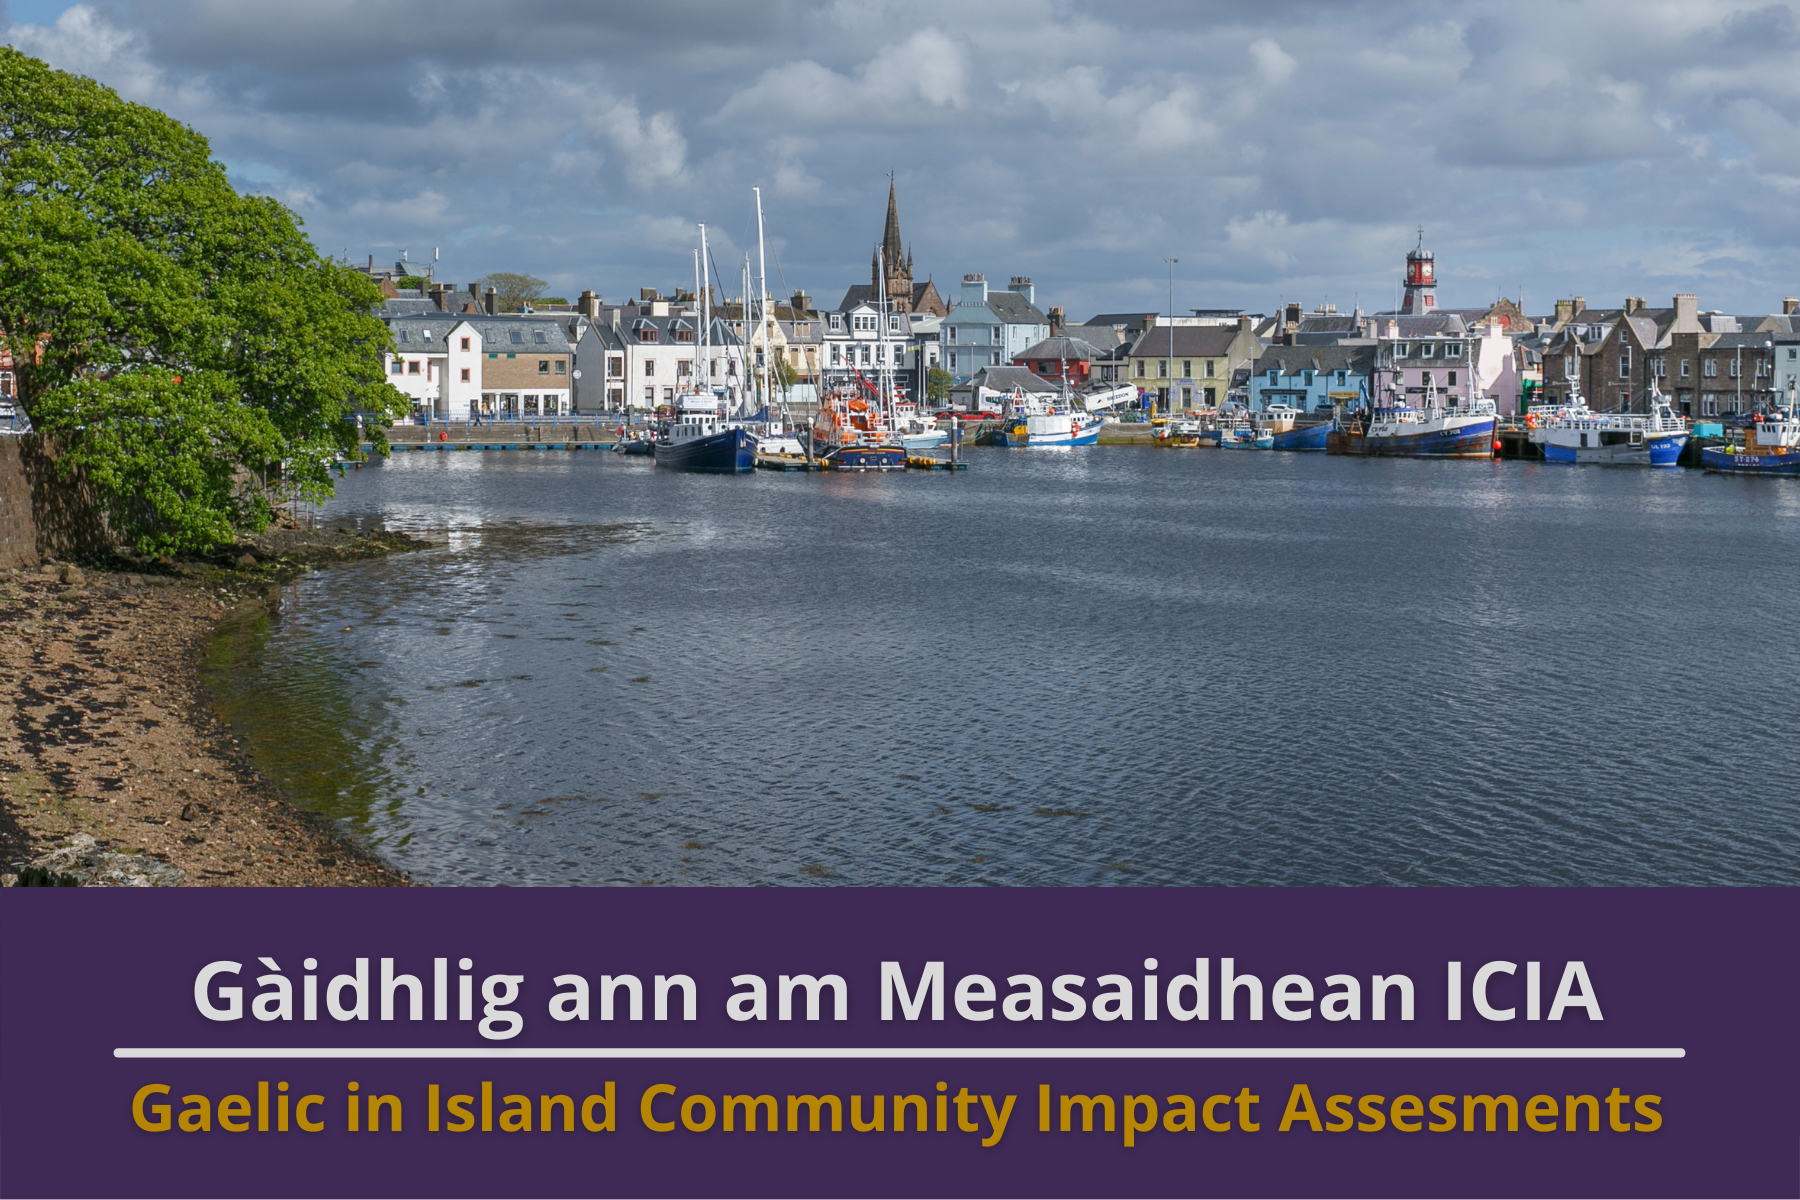 Impact on Gaelic is now a part of Island Community Impact Assessments for the first time